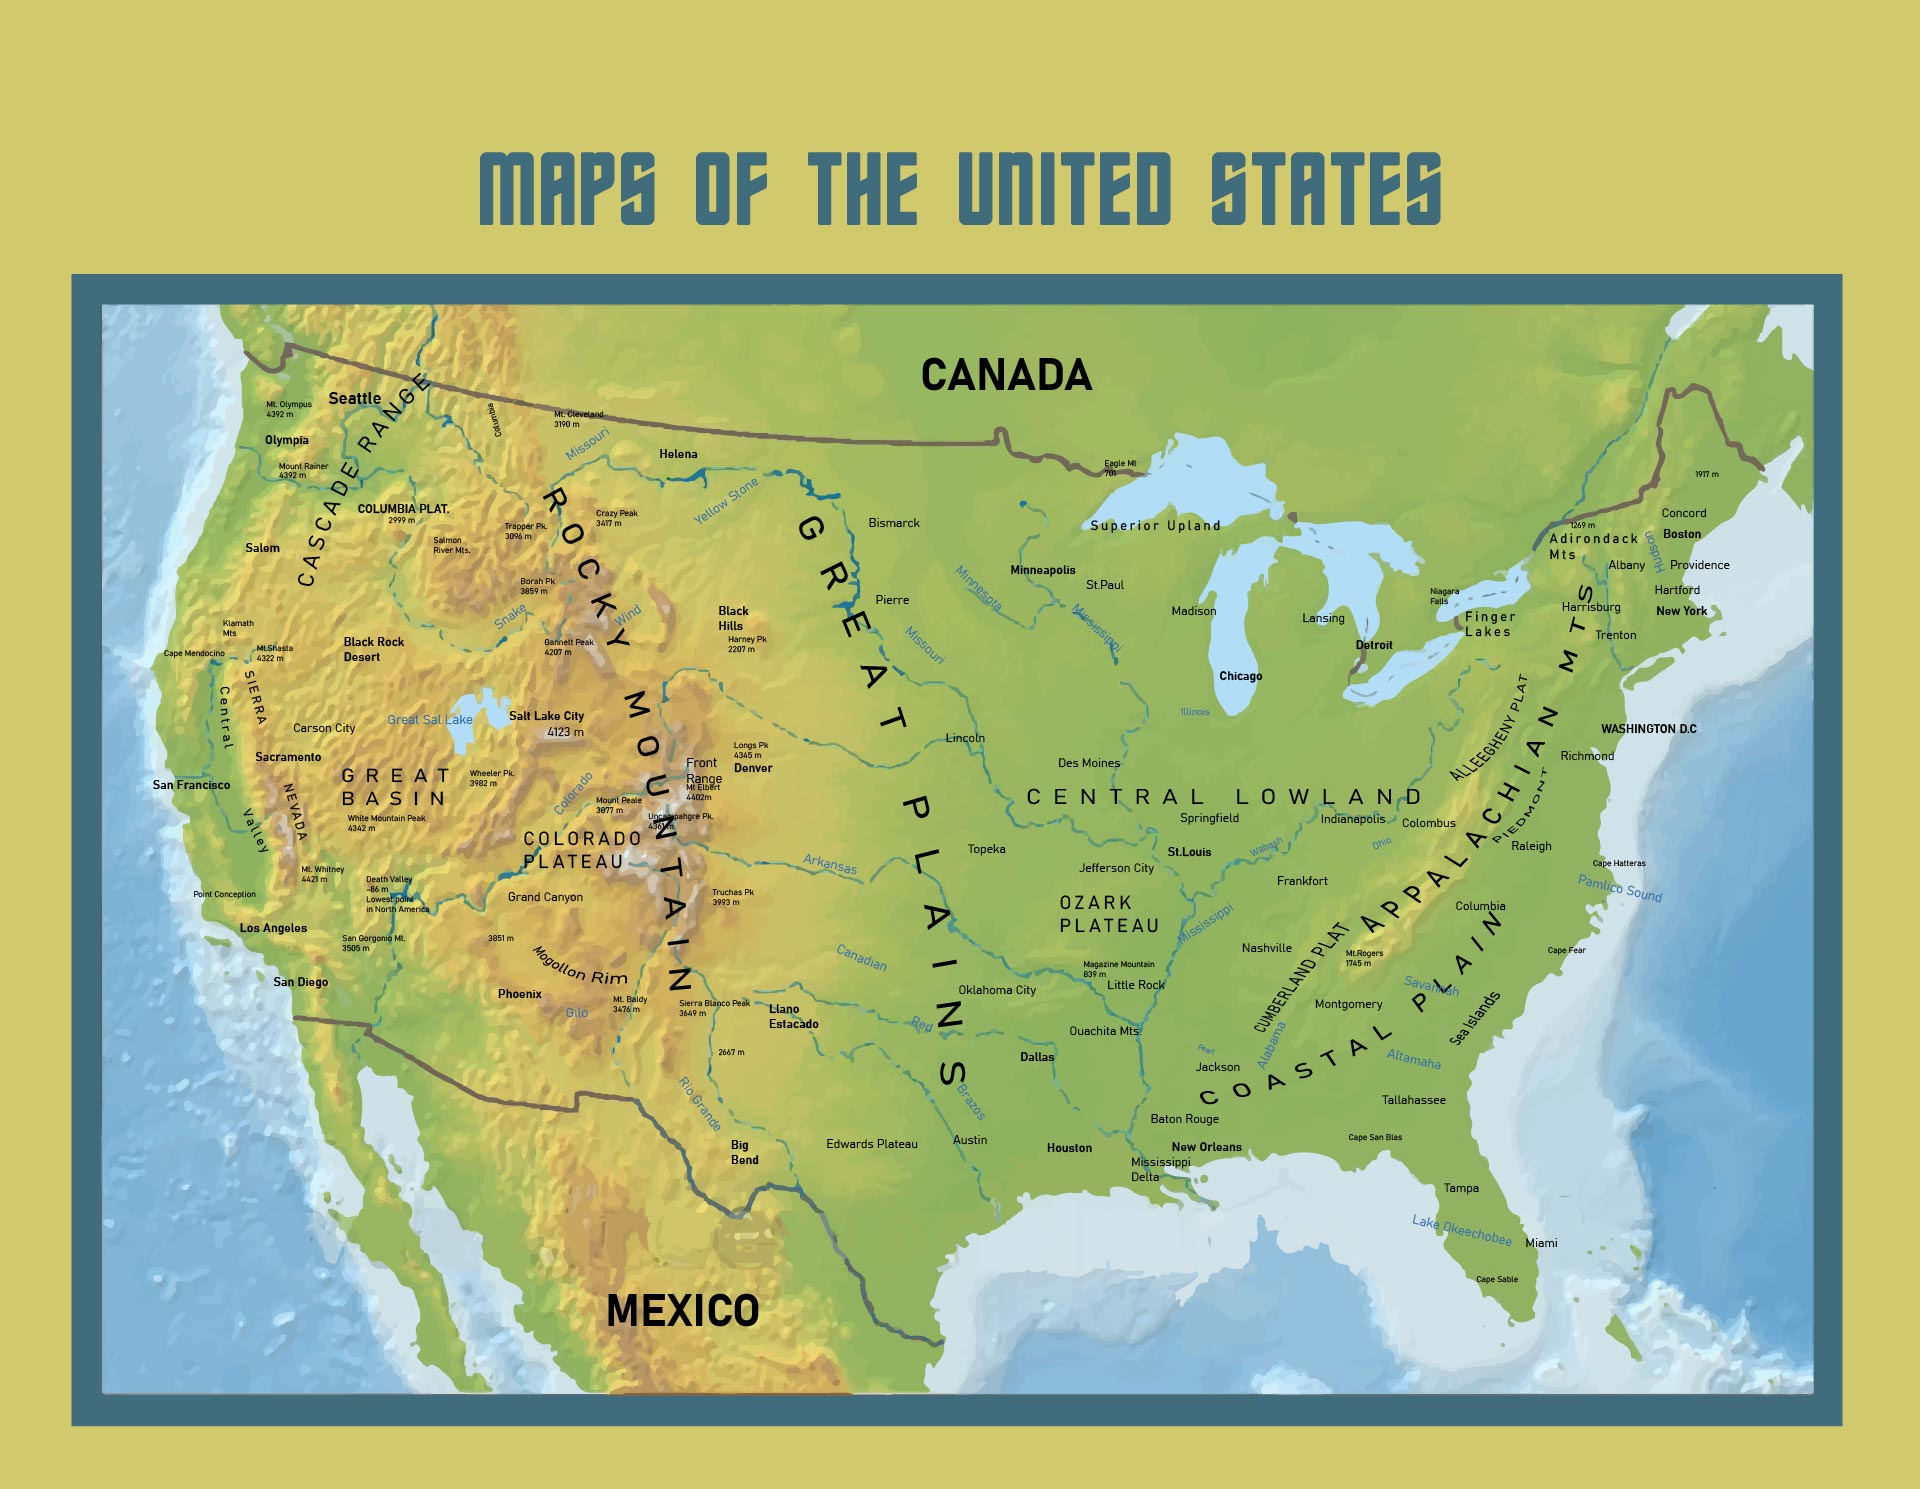 About the usa > travel > the regions of the united states